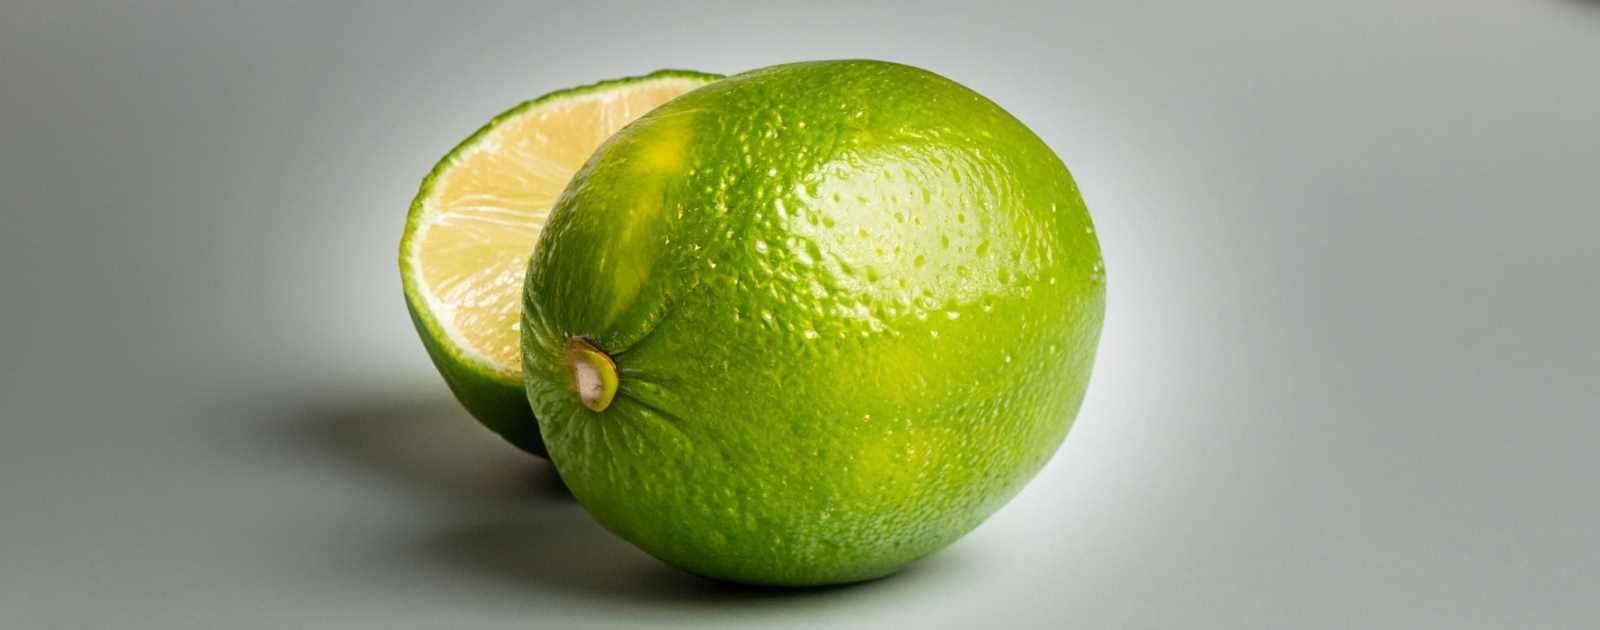 Is Lime a Melon or a Fruit?